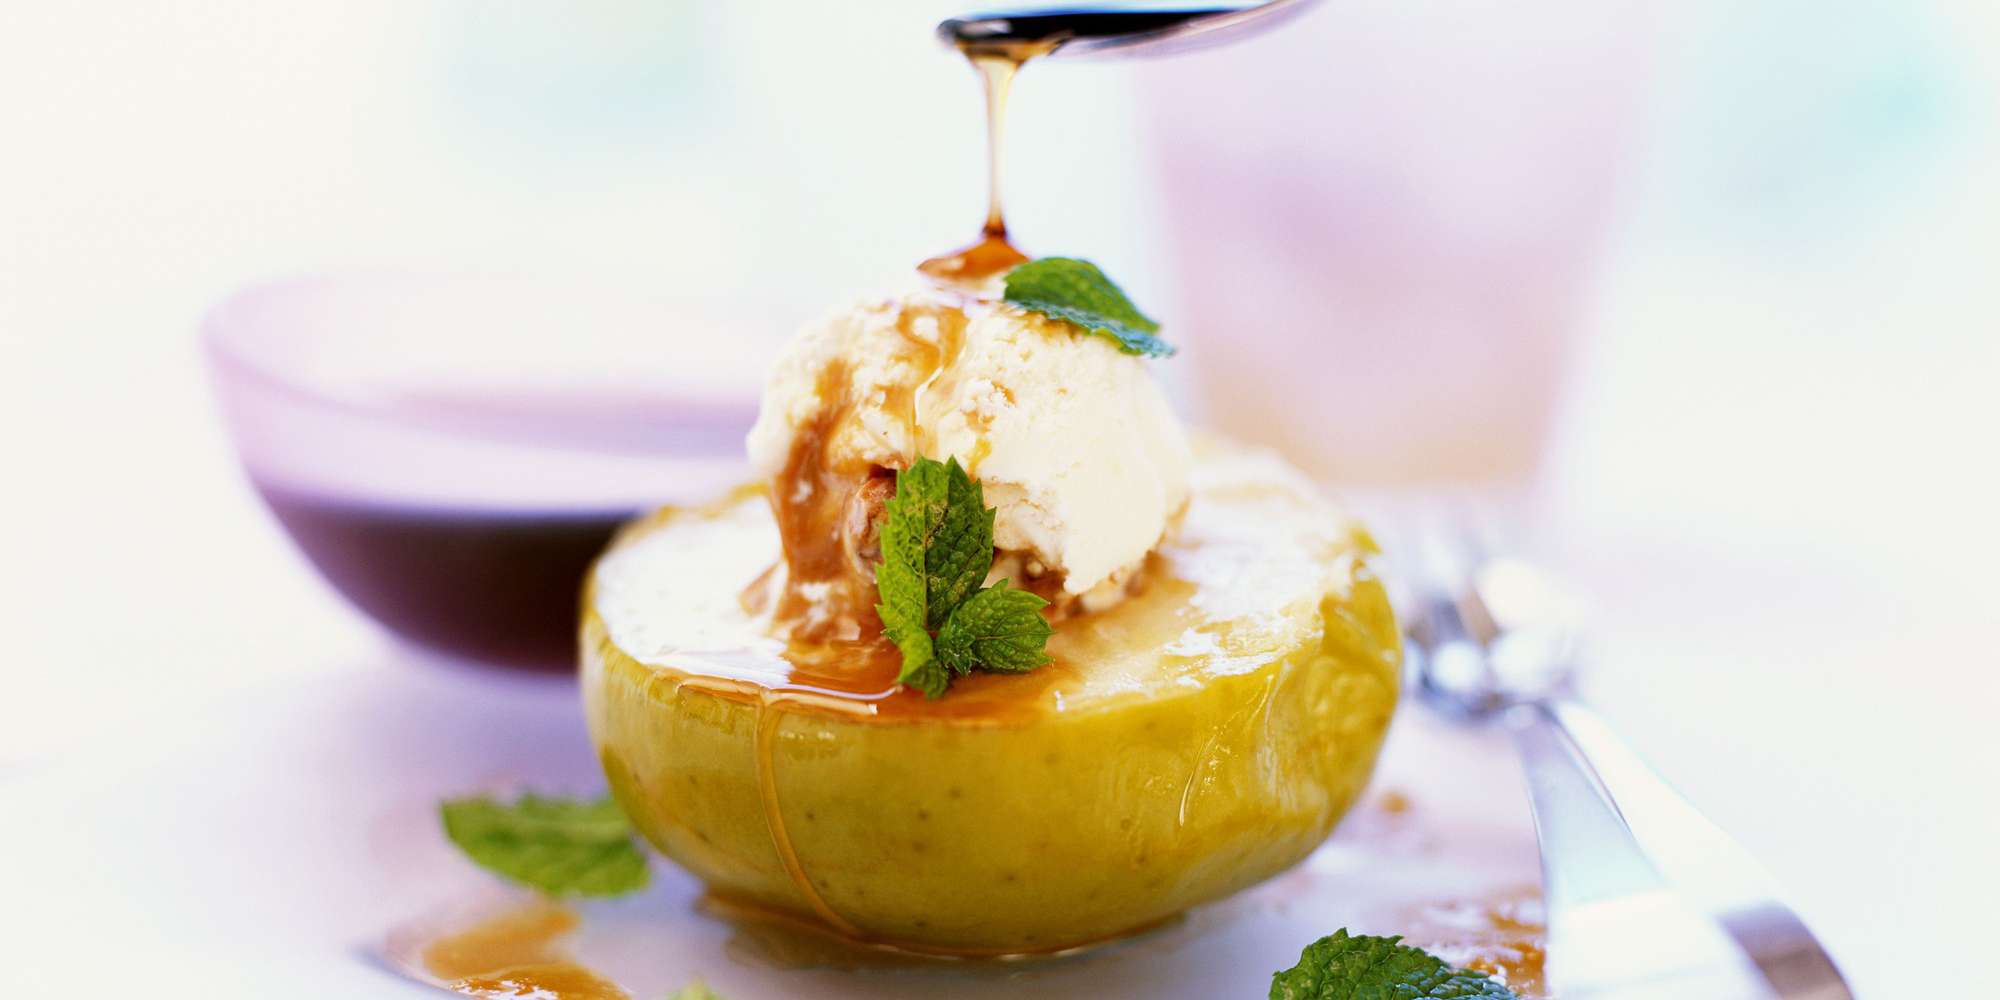 Spiced Baked Apple Recipe